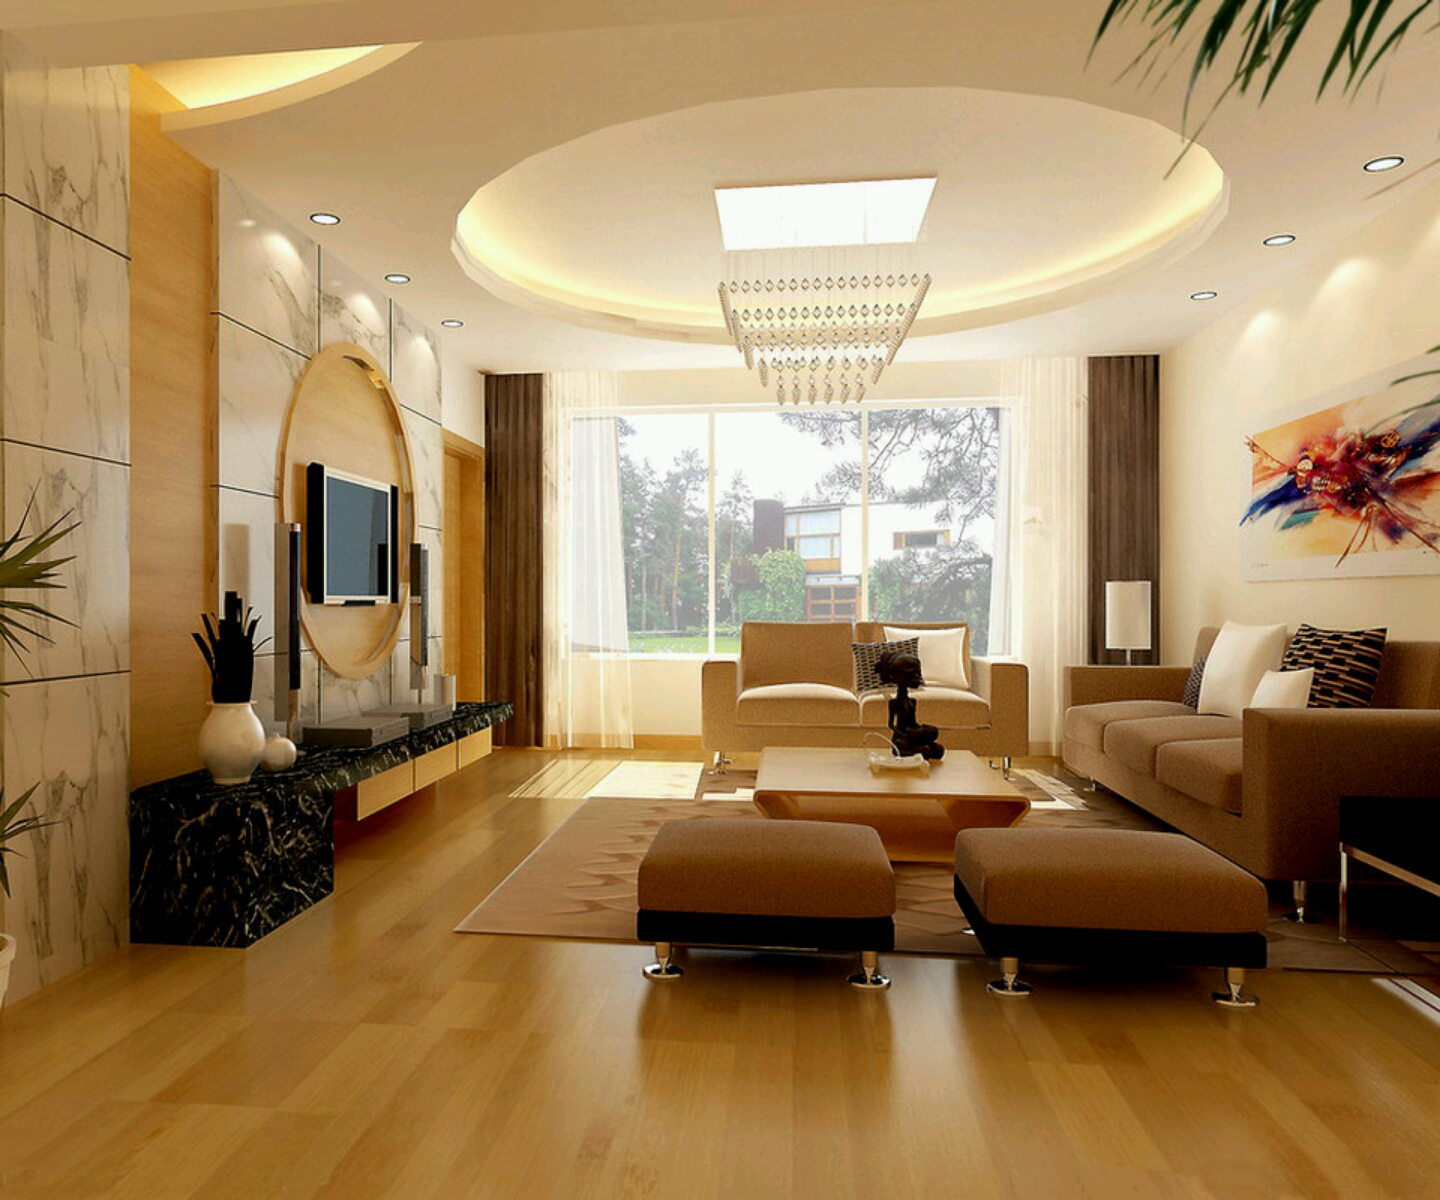 Modern interior decoration living rooms ceiling designs ideas New home designs